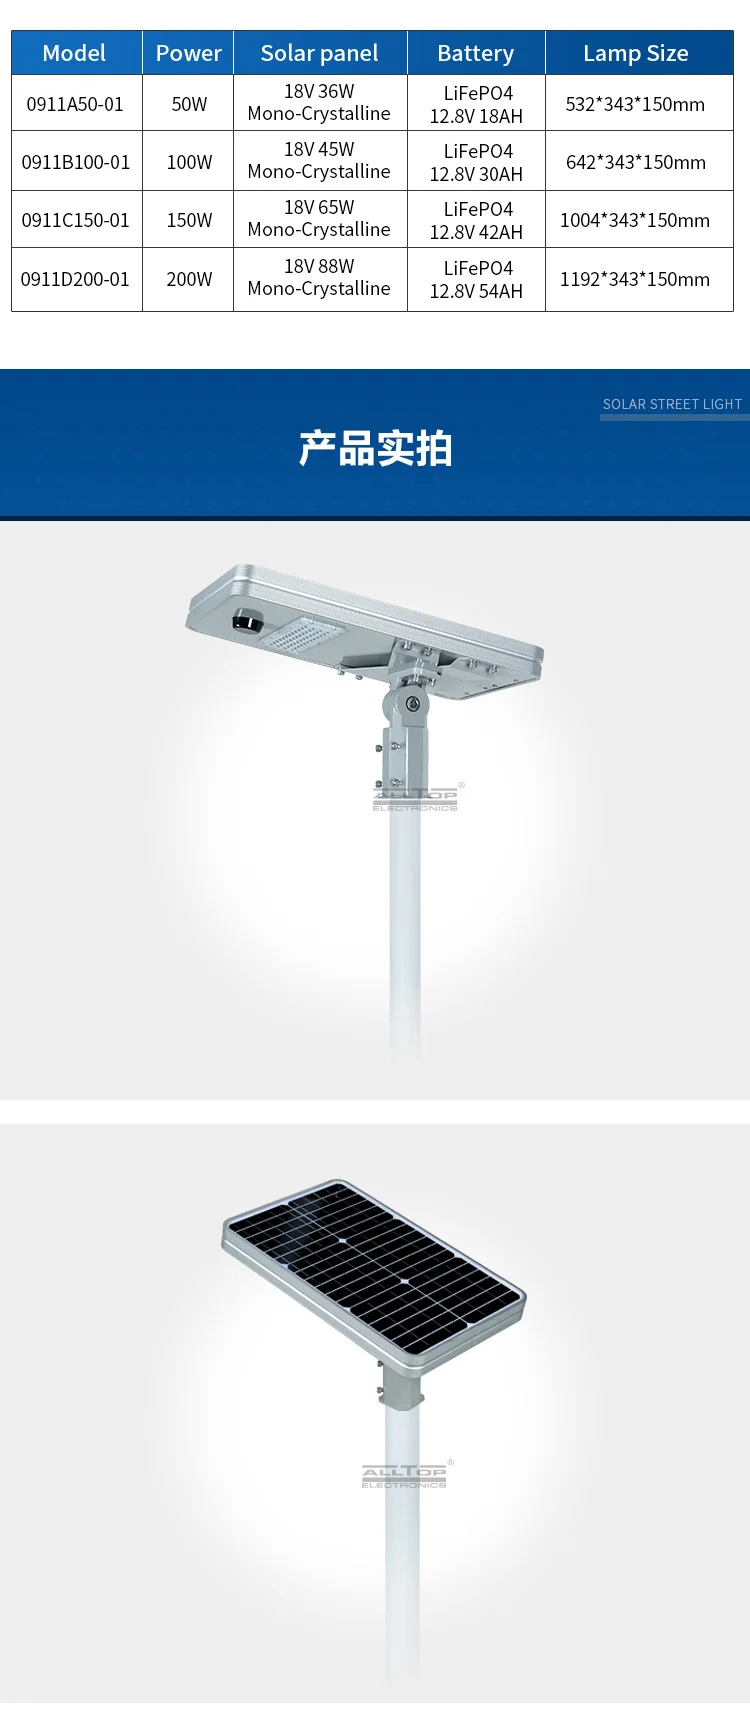 ALLTOP High quality outdoor ip65 smd 50w 100w 150w 200w integrated led solar street lamp